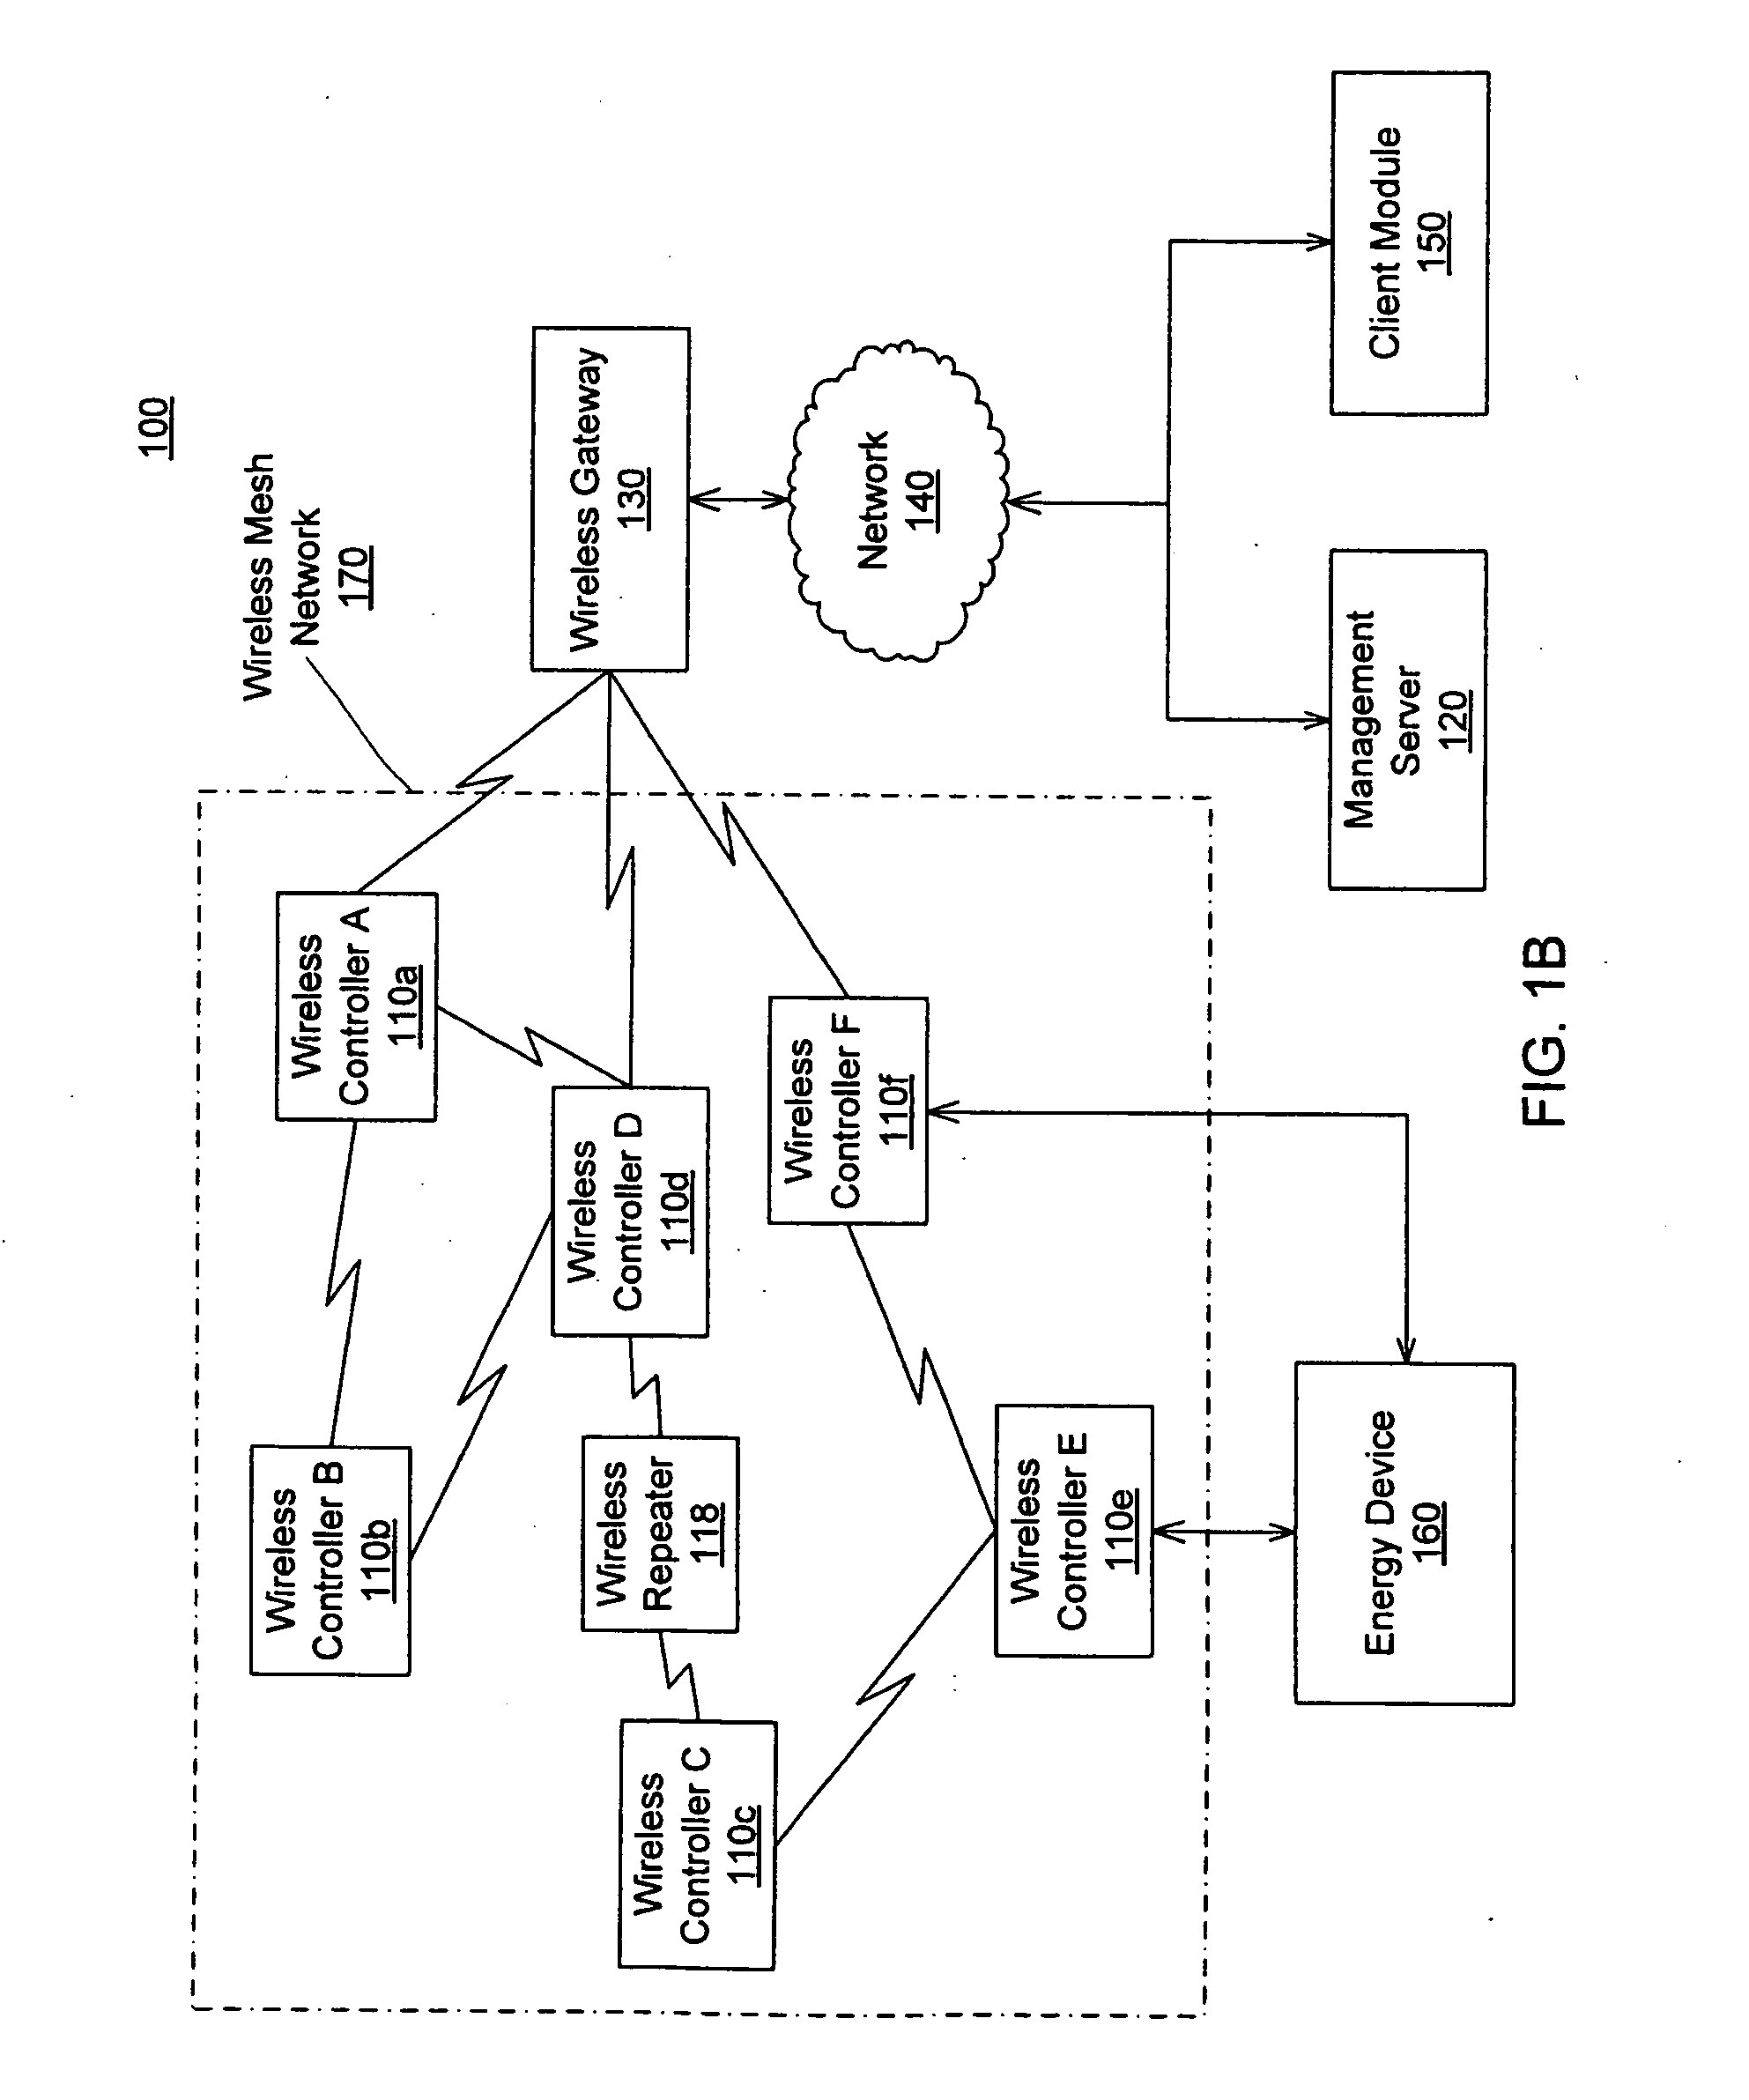 System and method for energy management